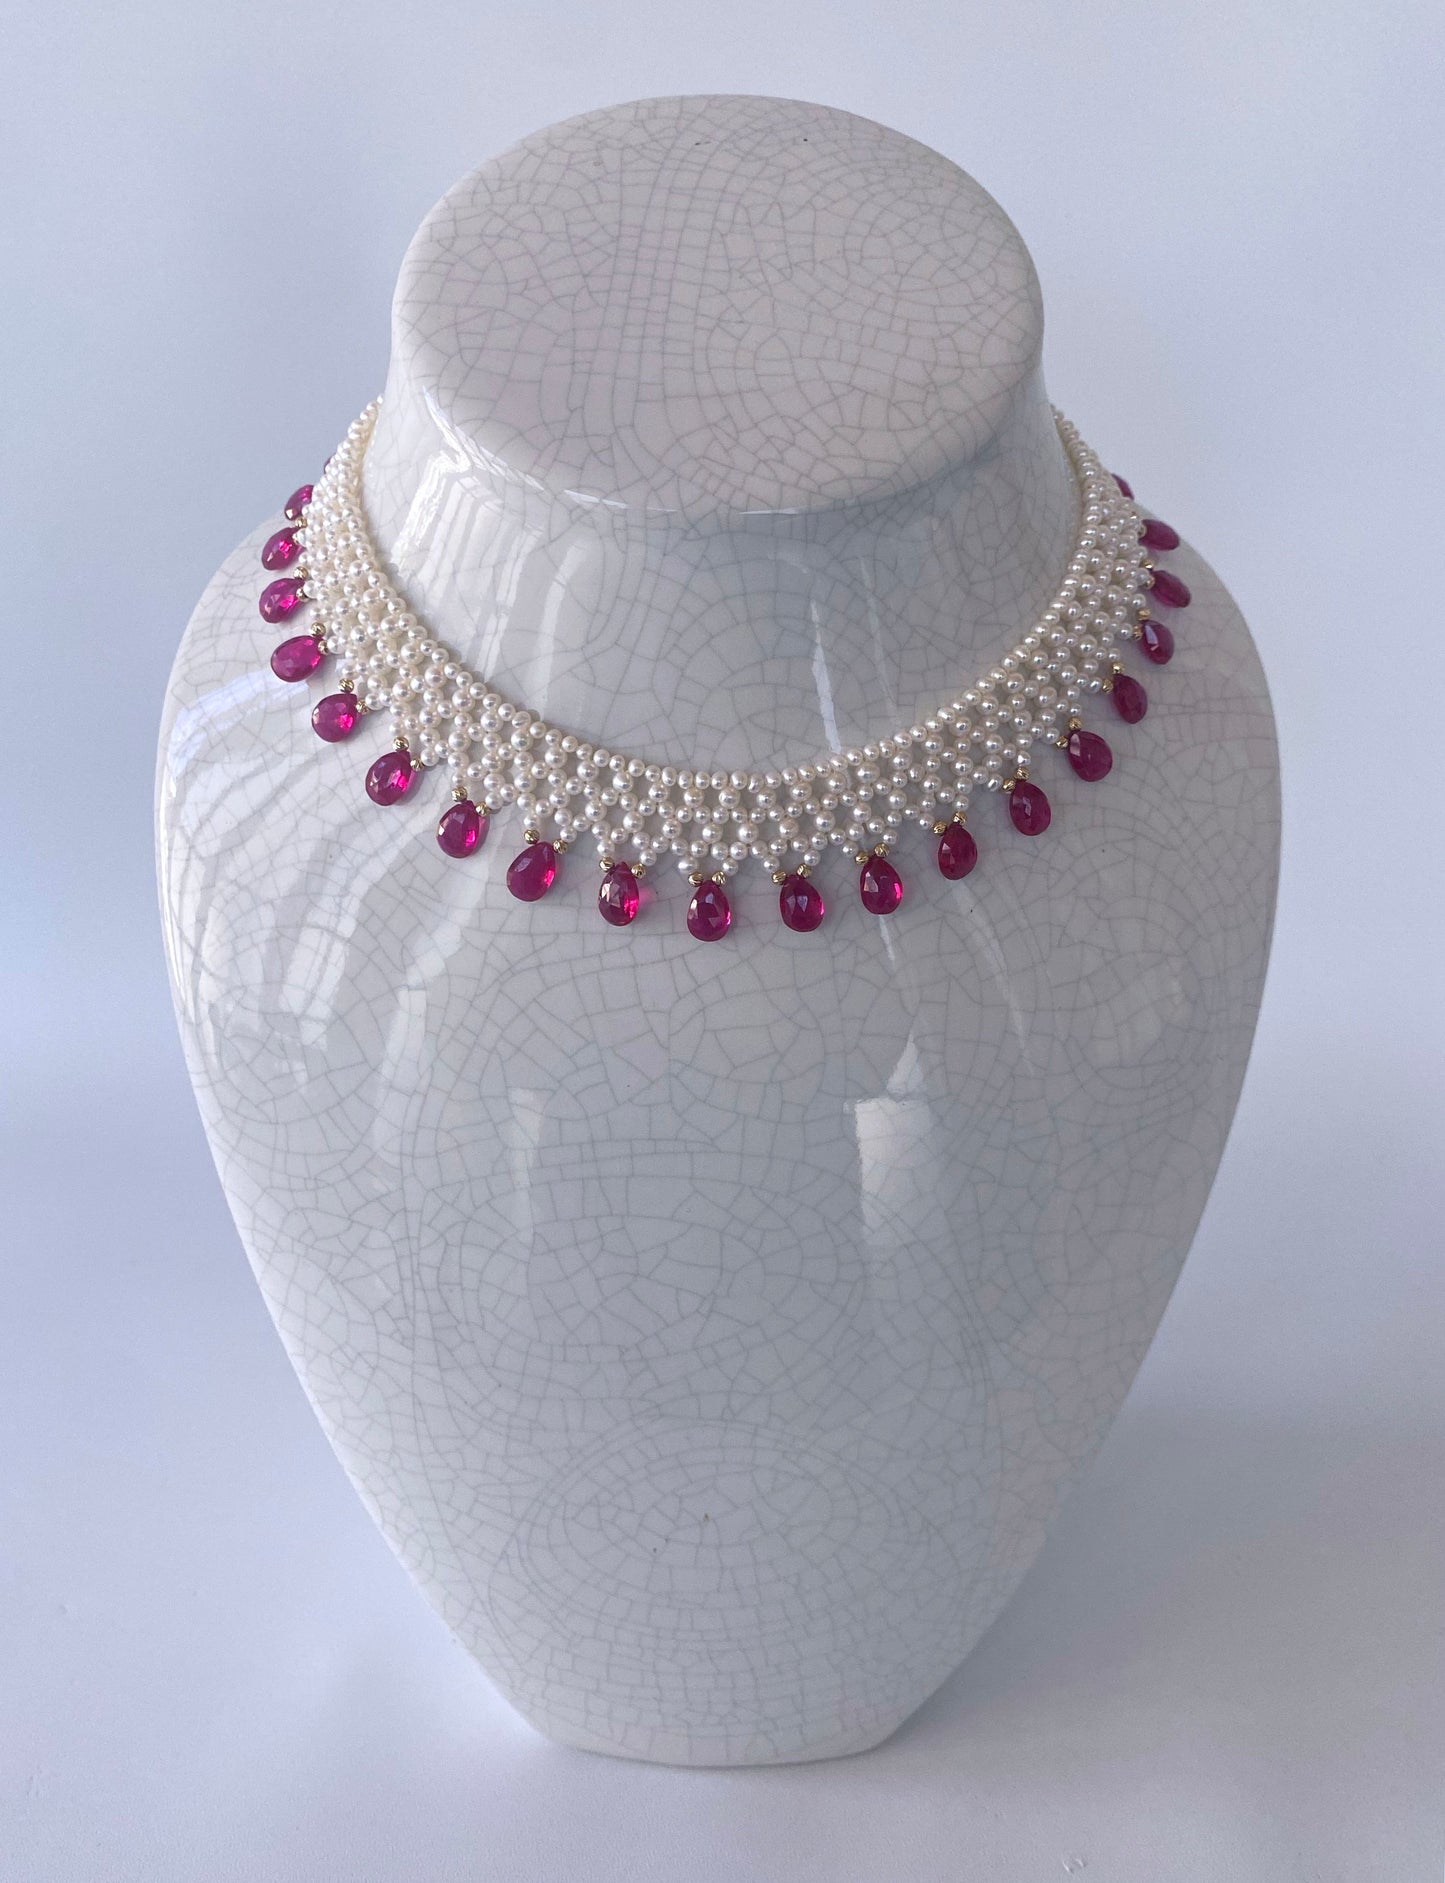 Ultimate Valentine's Pink Sapphire & Pearl Necklace, 14k Yellow Gold